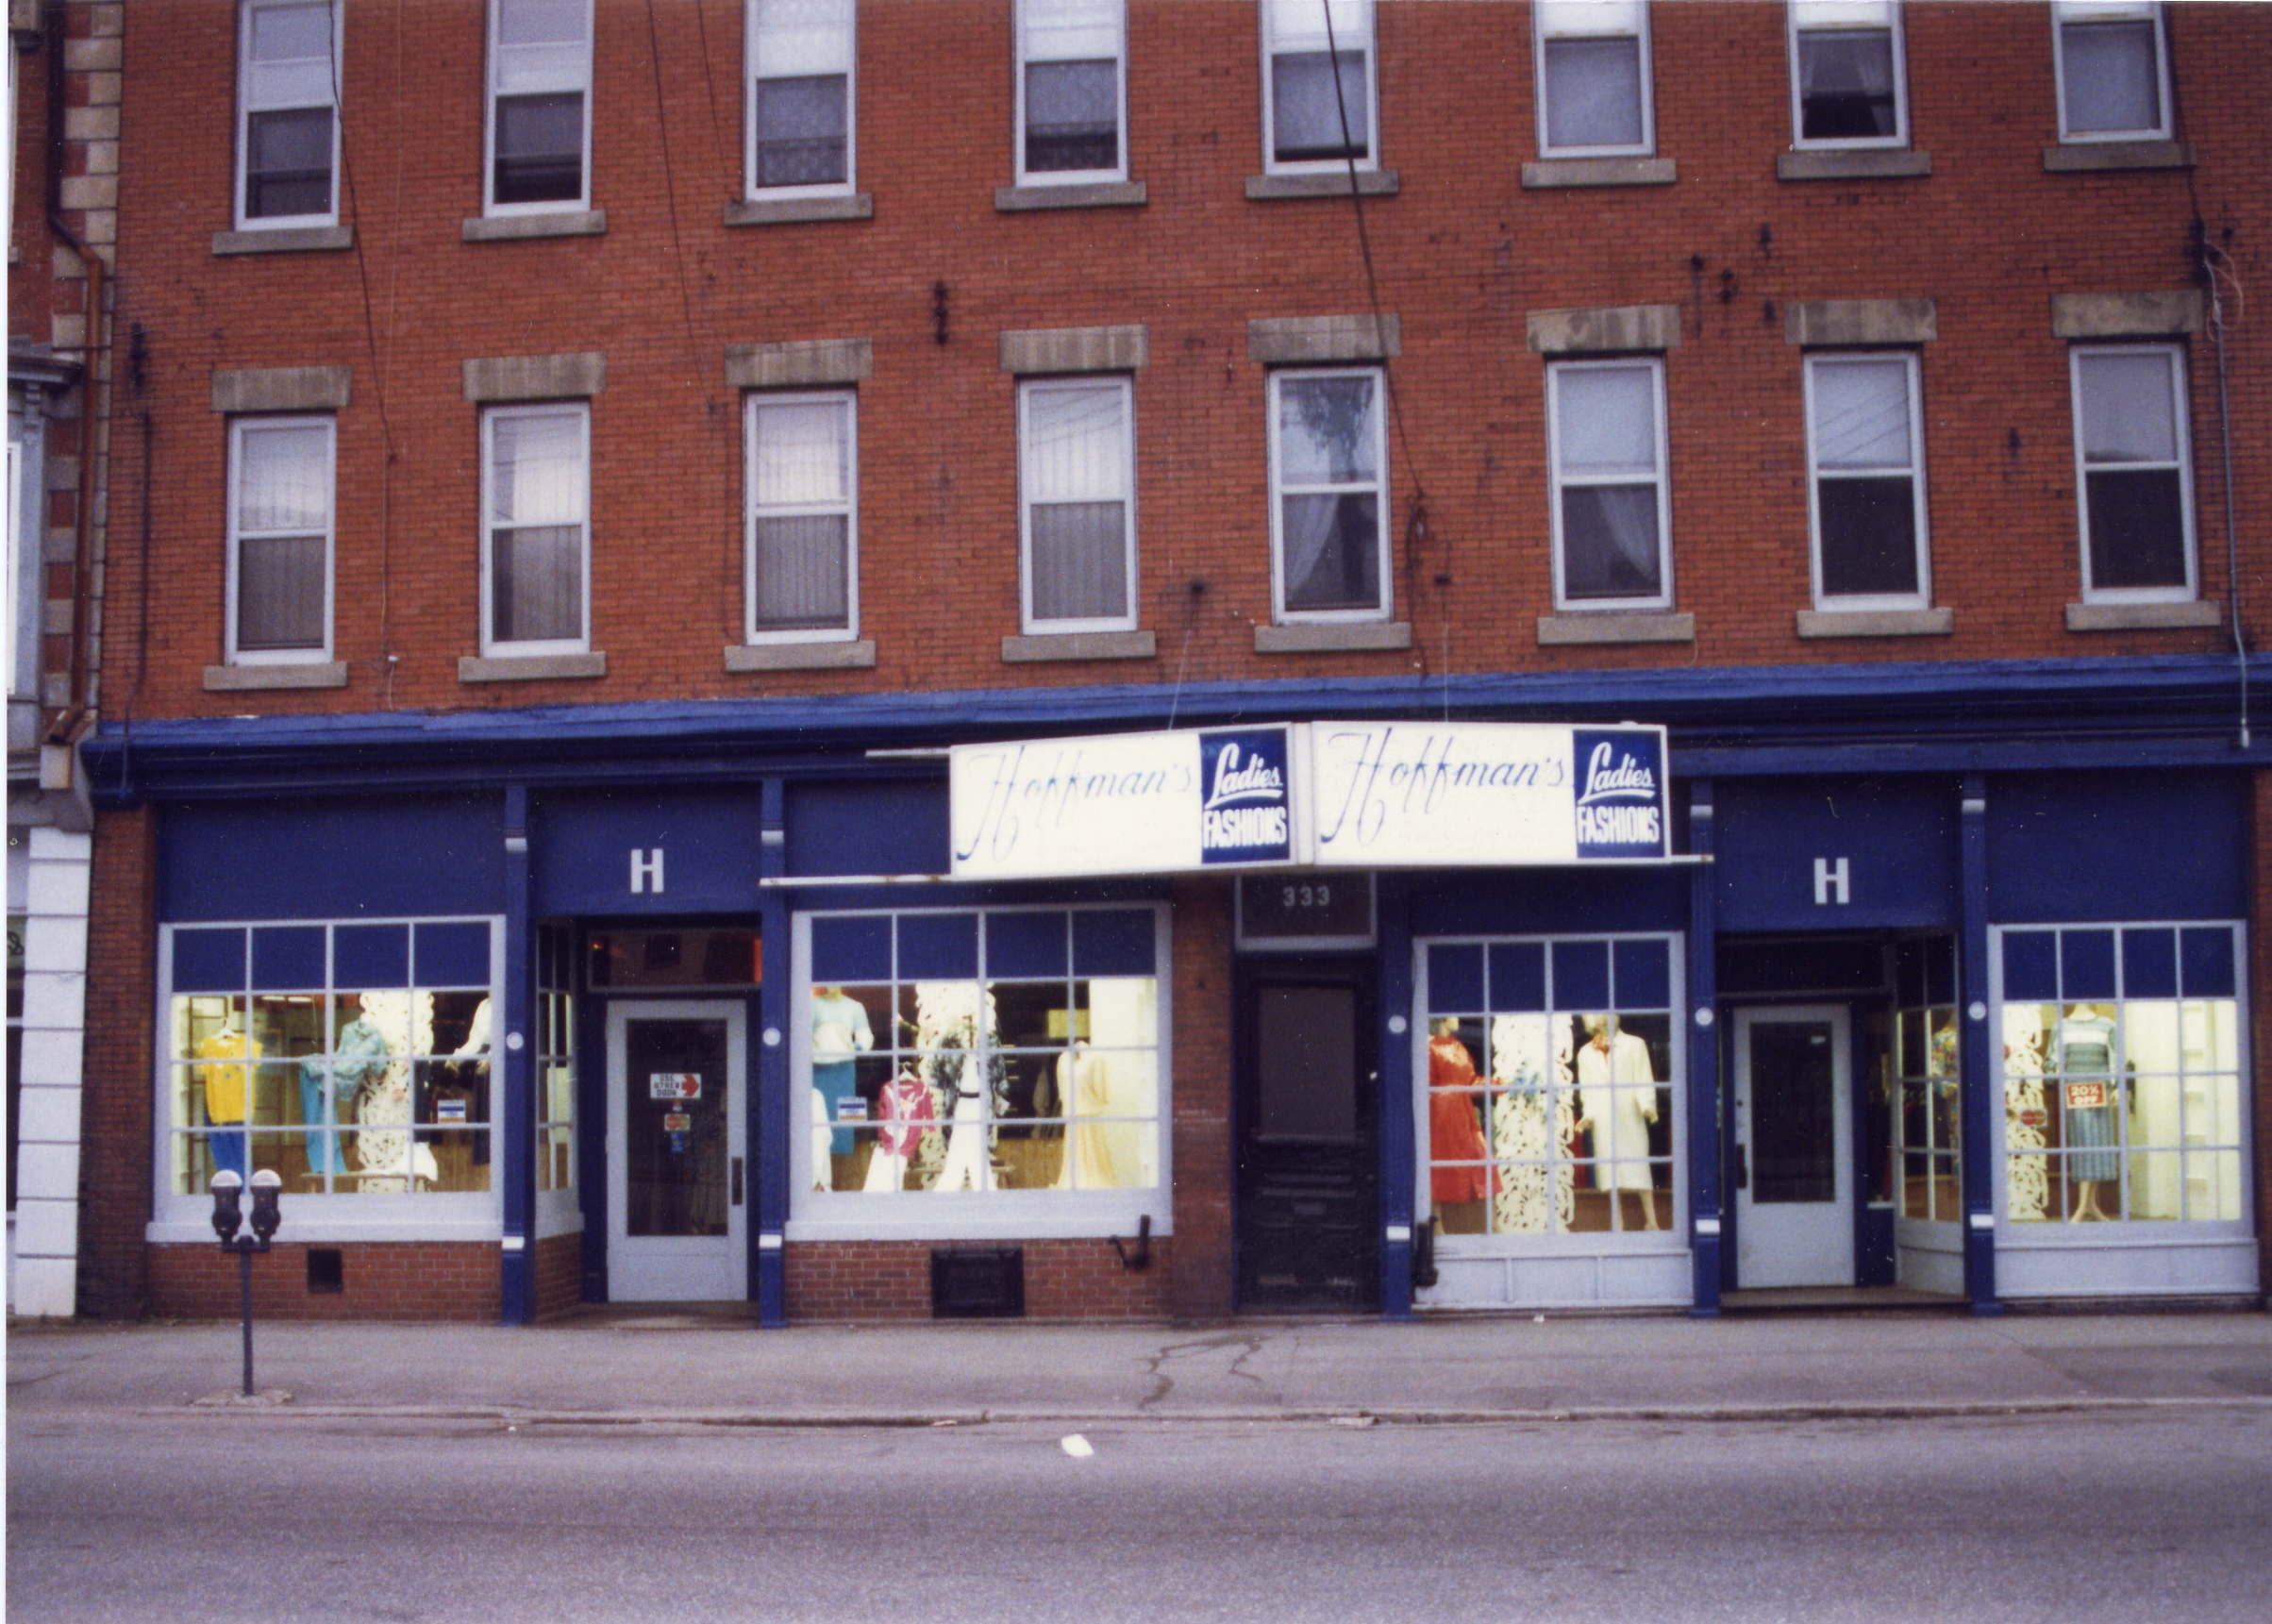 Exterior of brick building with store at street level. The store had four display windows with a sign for Hoffman’s centred above the windows.